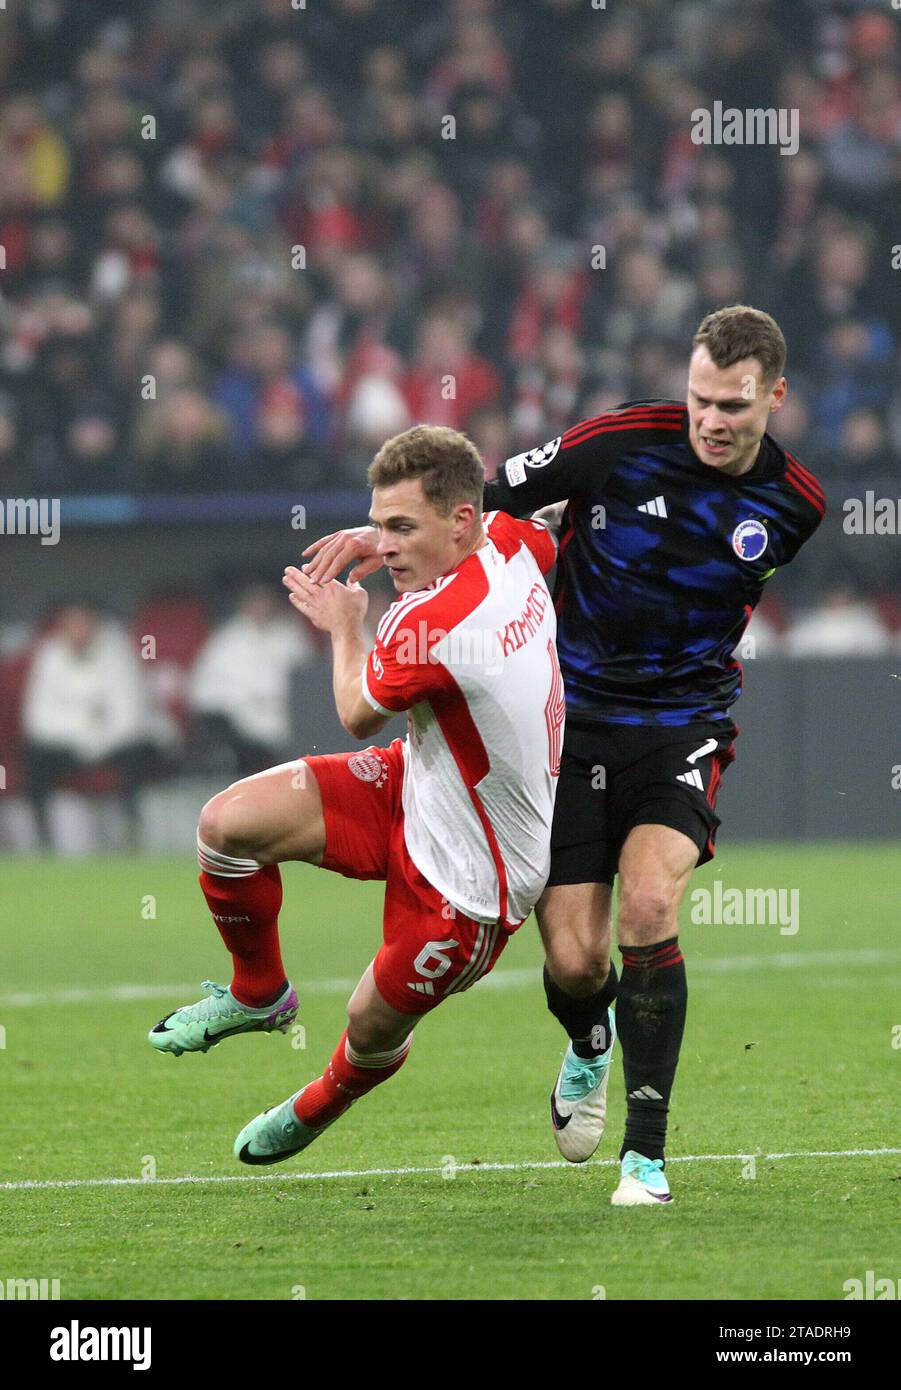 Munich, Germany. 29th Nov, 2023. MUNICH, Germany 29. November 2023; 6 Joshua KIMMICH and #12 Lukas Lerager during the football Champions League Match between Fc Bayern and F.C. COPENHAGEN in Munich at the Allianz Arena on Wednesday 29 November. - picture is for press use; photo by Arthur THILL/ATP images (THILL Arthur/ATP/SPP) Credit: SPP Sport Press Photo. /Alamy Live News Stock Photo